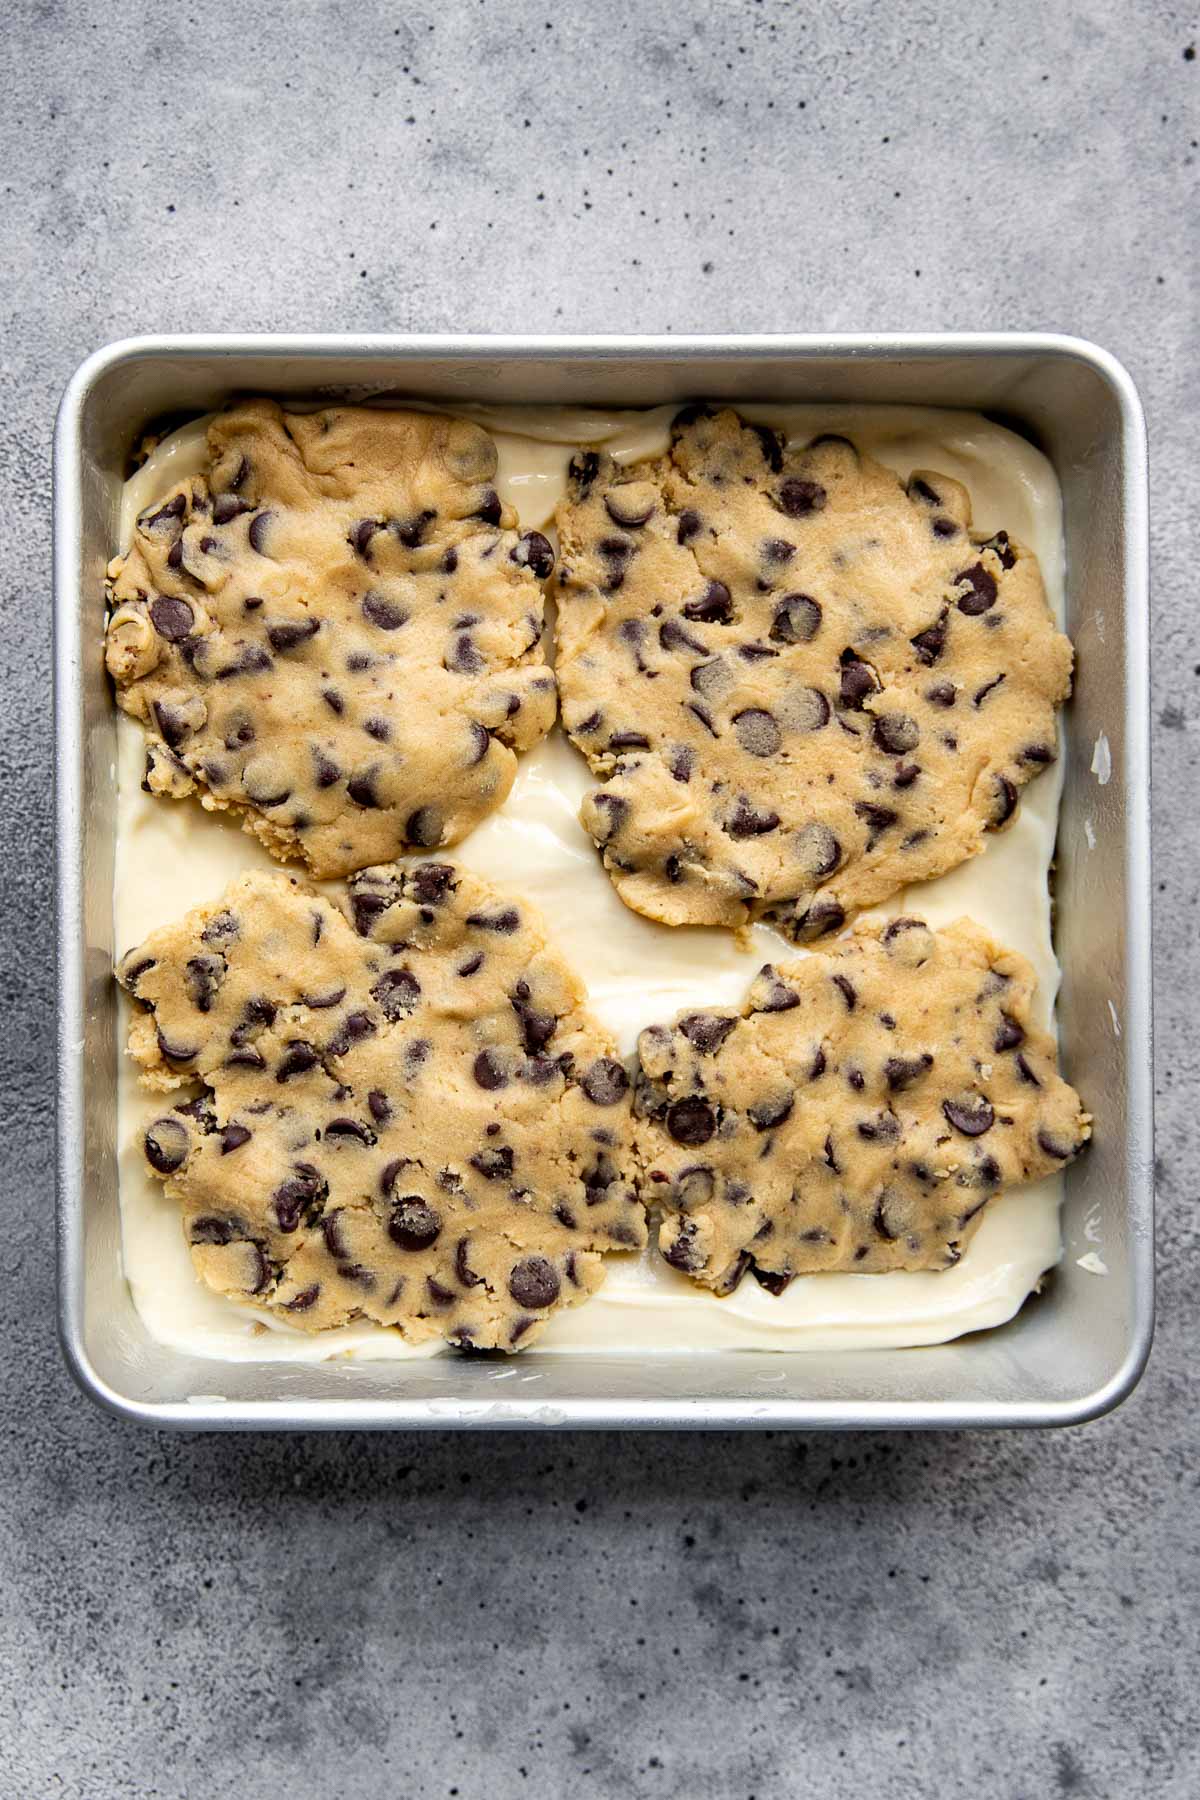 Cookie dough on top of a cheesecake filling in a 8x8 pan.